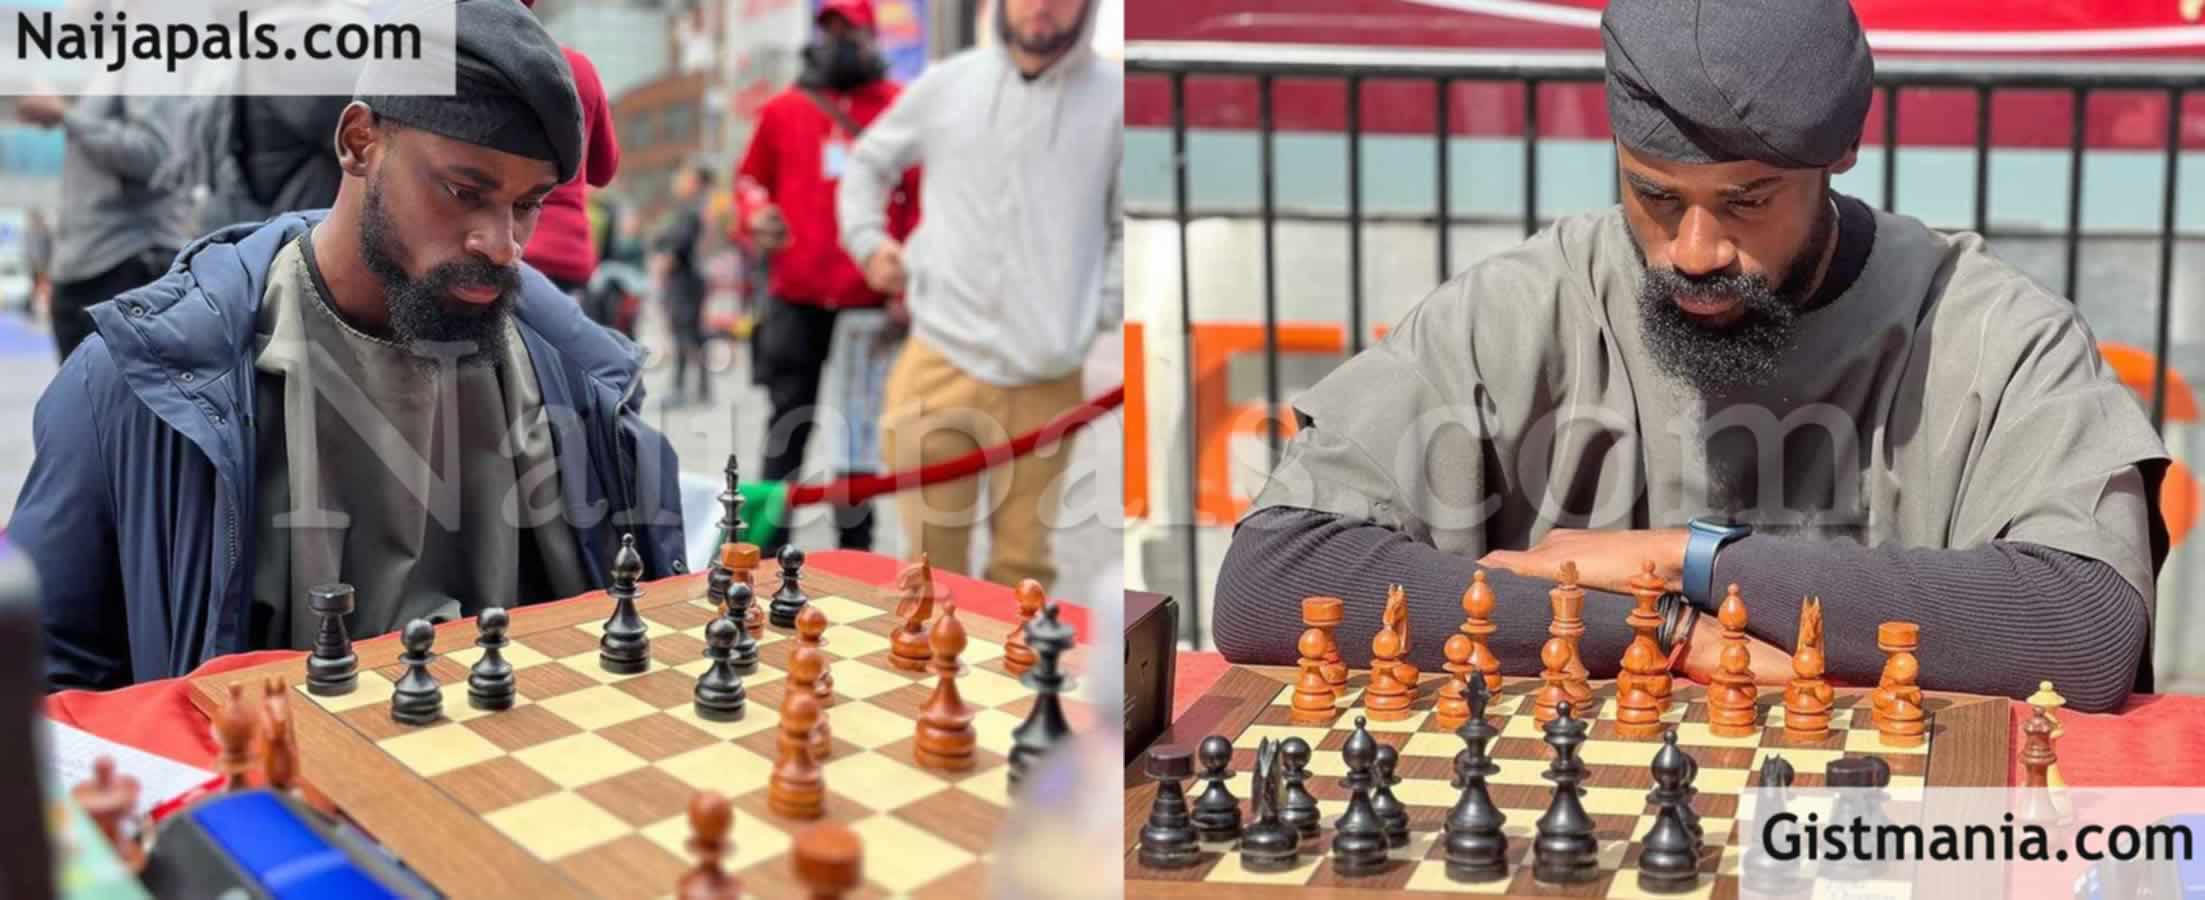 10 Opponents Won So Far! Tunde Onakoya Moves to Break Guinness Record For Longest Chess Played